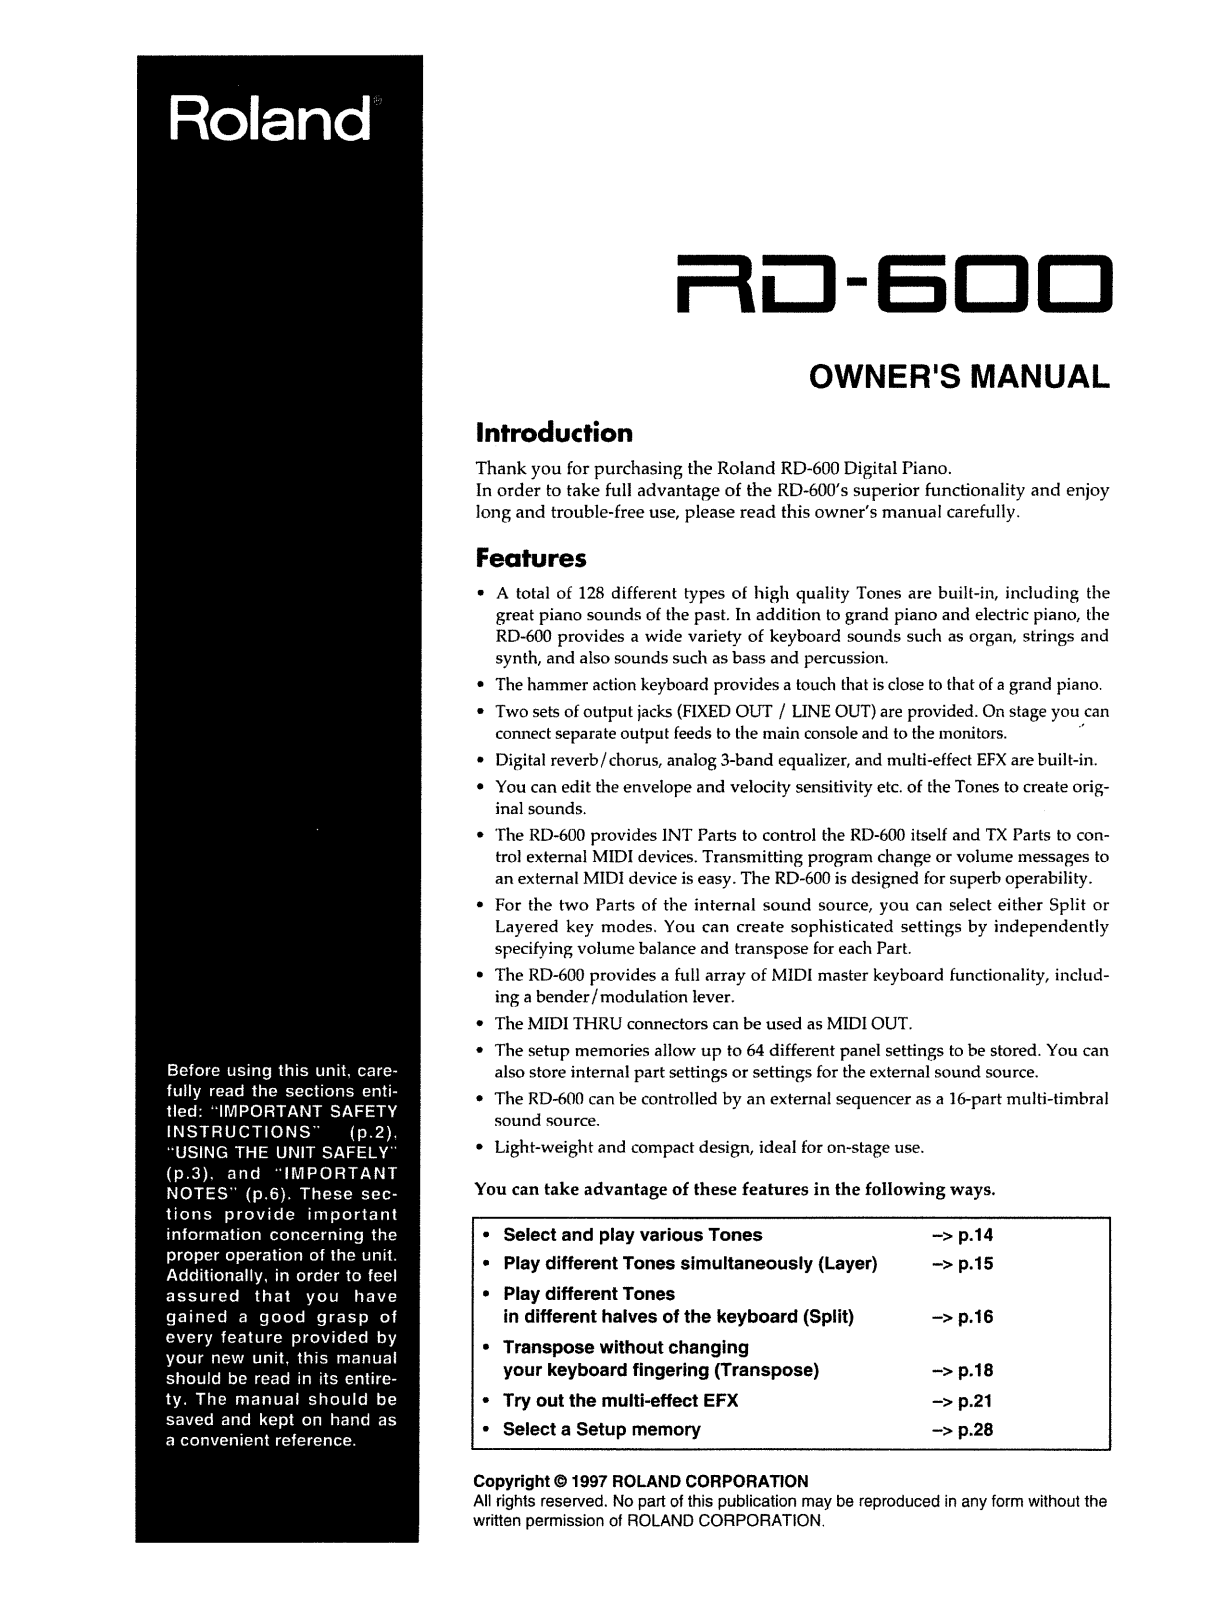 Roland RD-600 User Manual